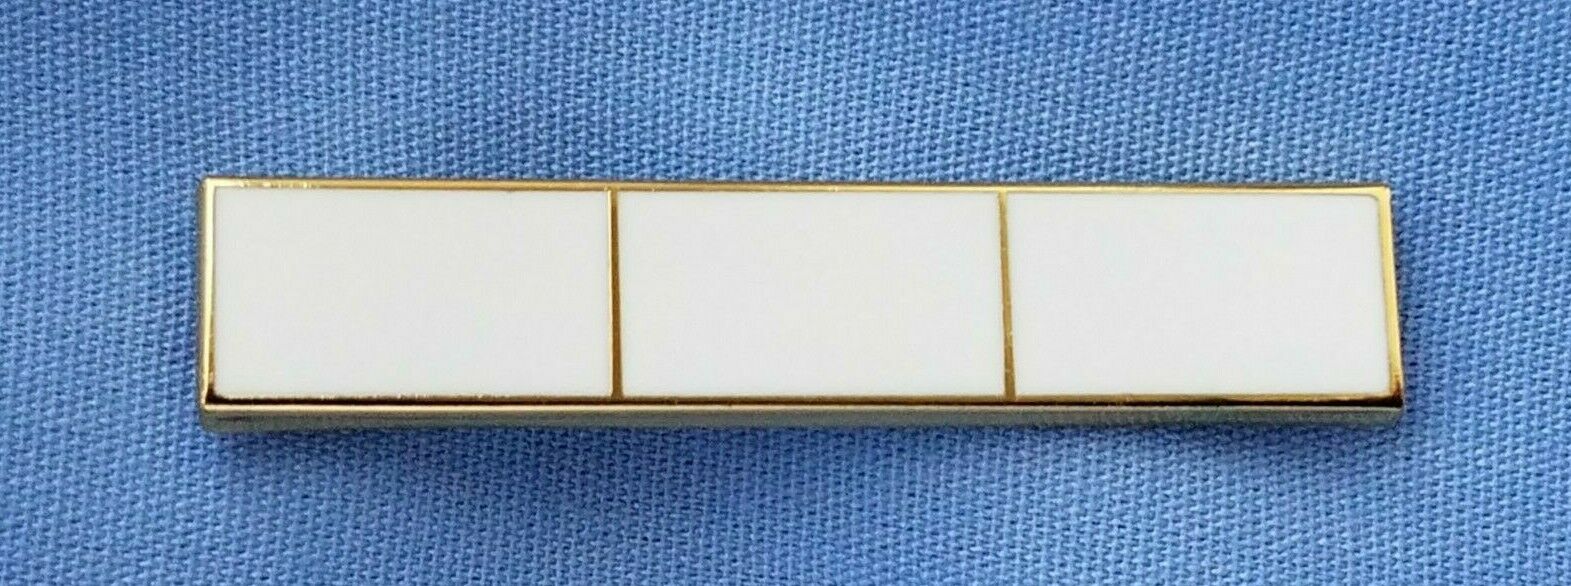 COMMENDATION AWARD BAR PIN with FREE Shipping! Item #1206